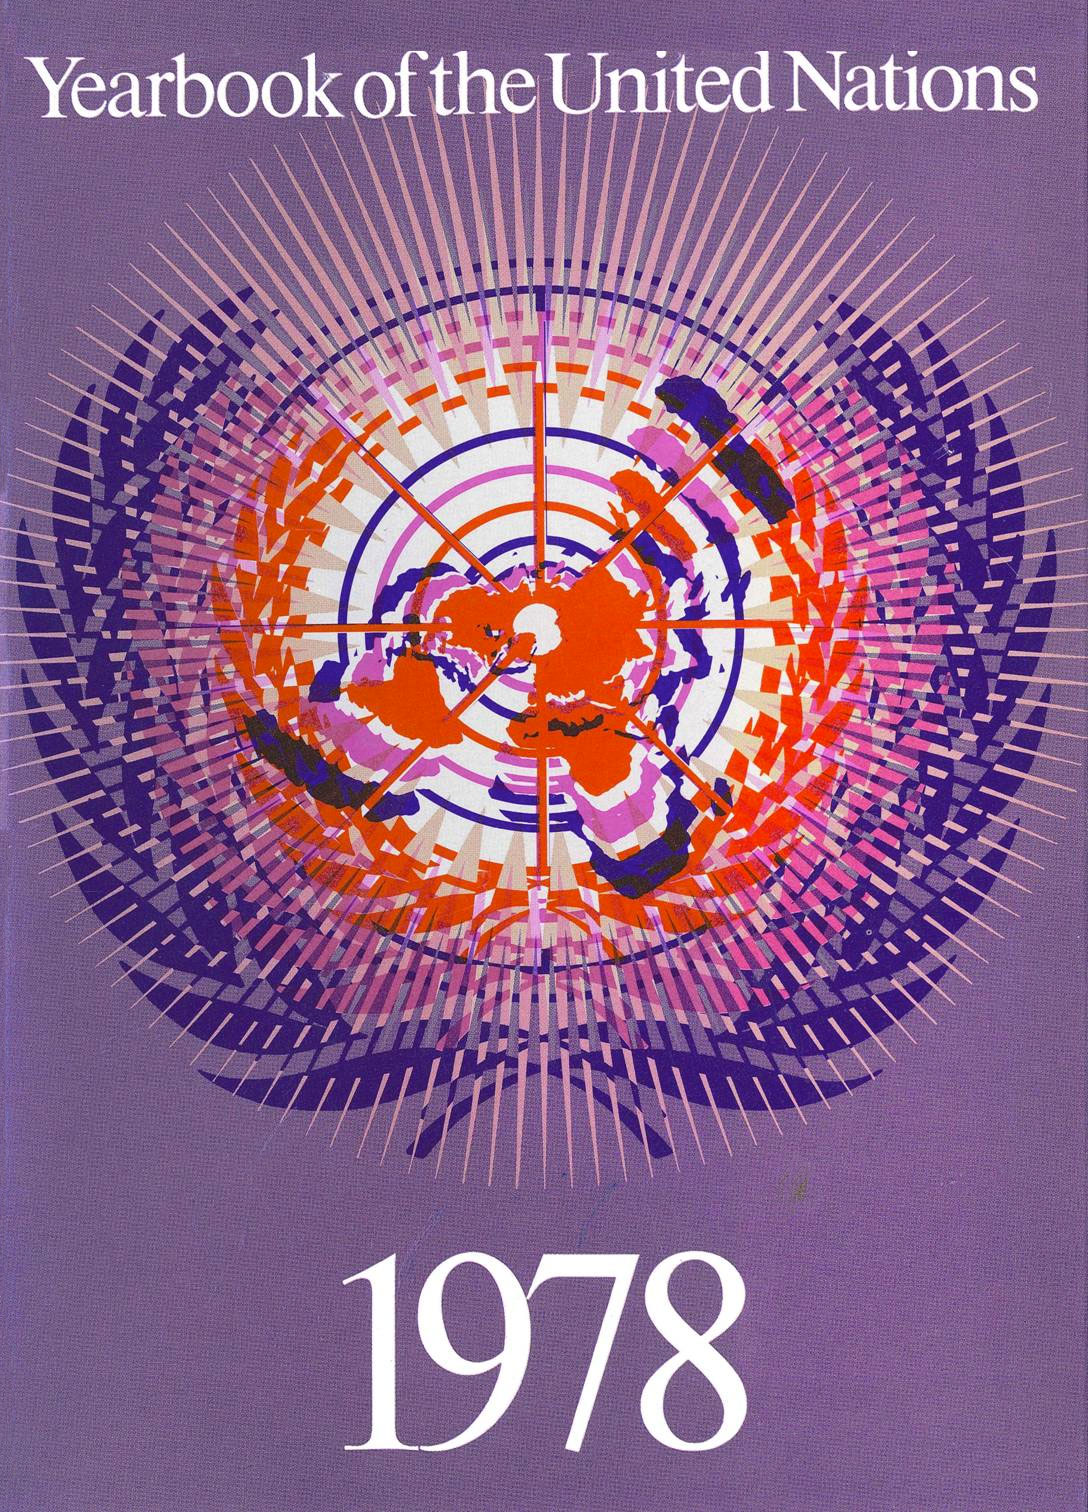 image of Yearbook of the United Nations 1978